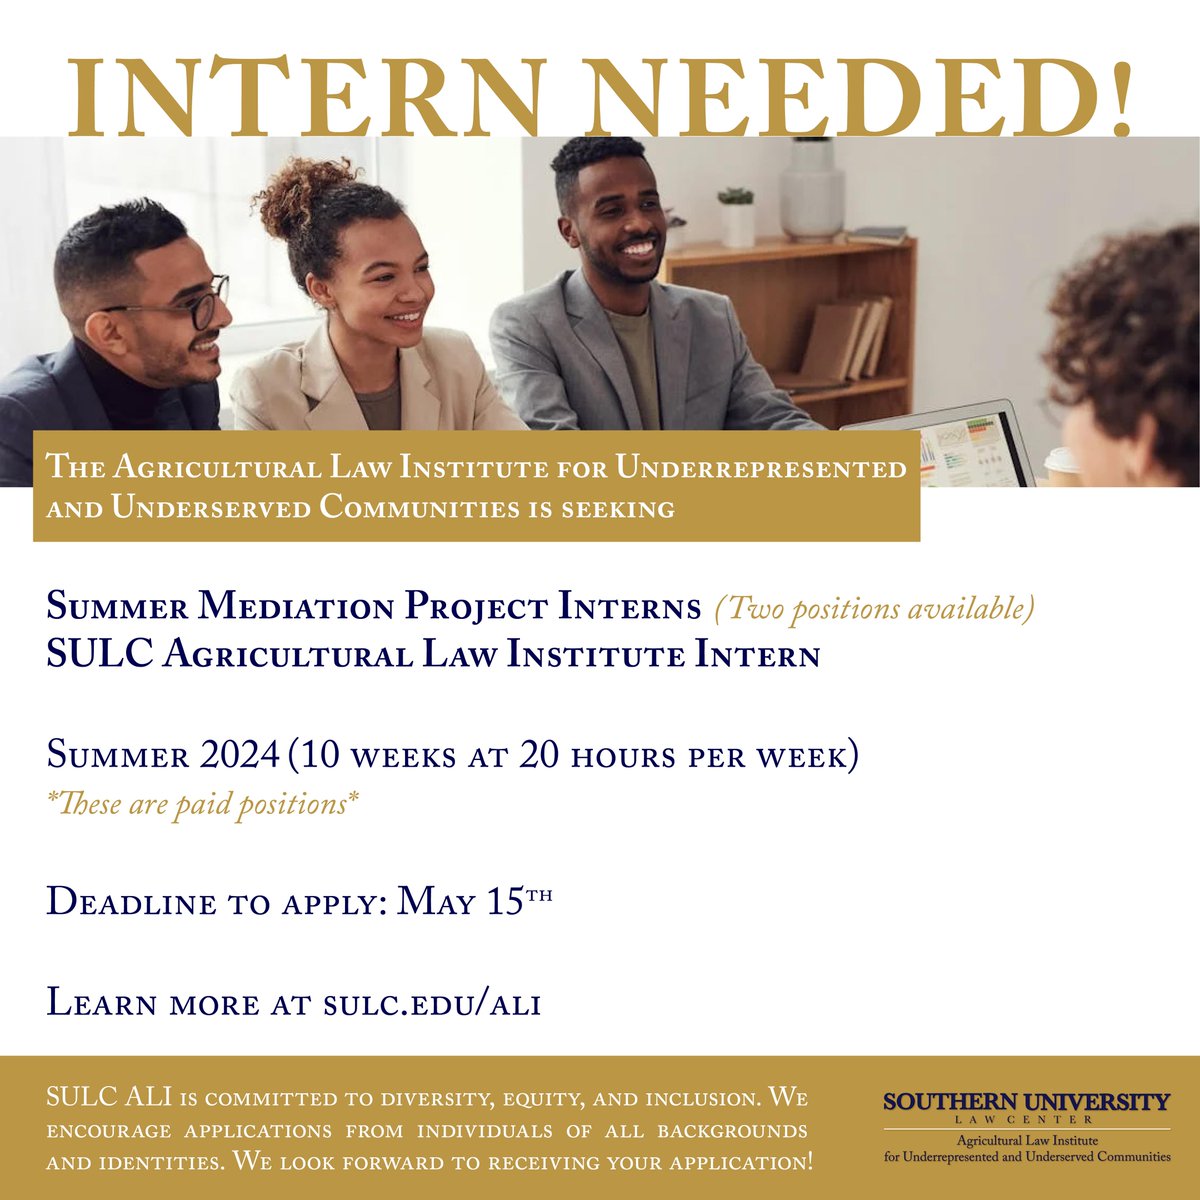 Interested in working with our Ag Law Institute? #SULC’s Agricultural Law Institute for Underrepresented and Underserved Communities is looking for two Summer Mediation Interns. Apply by May 15 for your chance to be considered. Visit sulc.edu/ali for details.